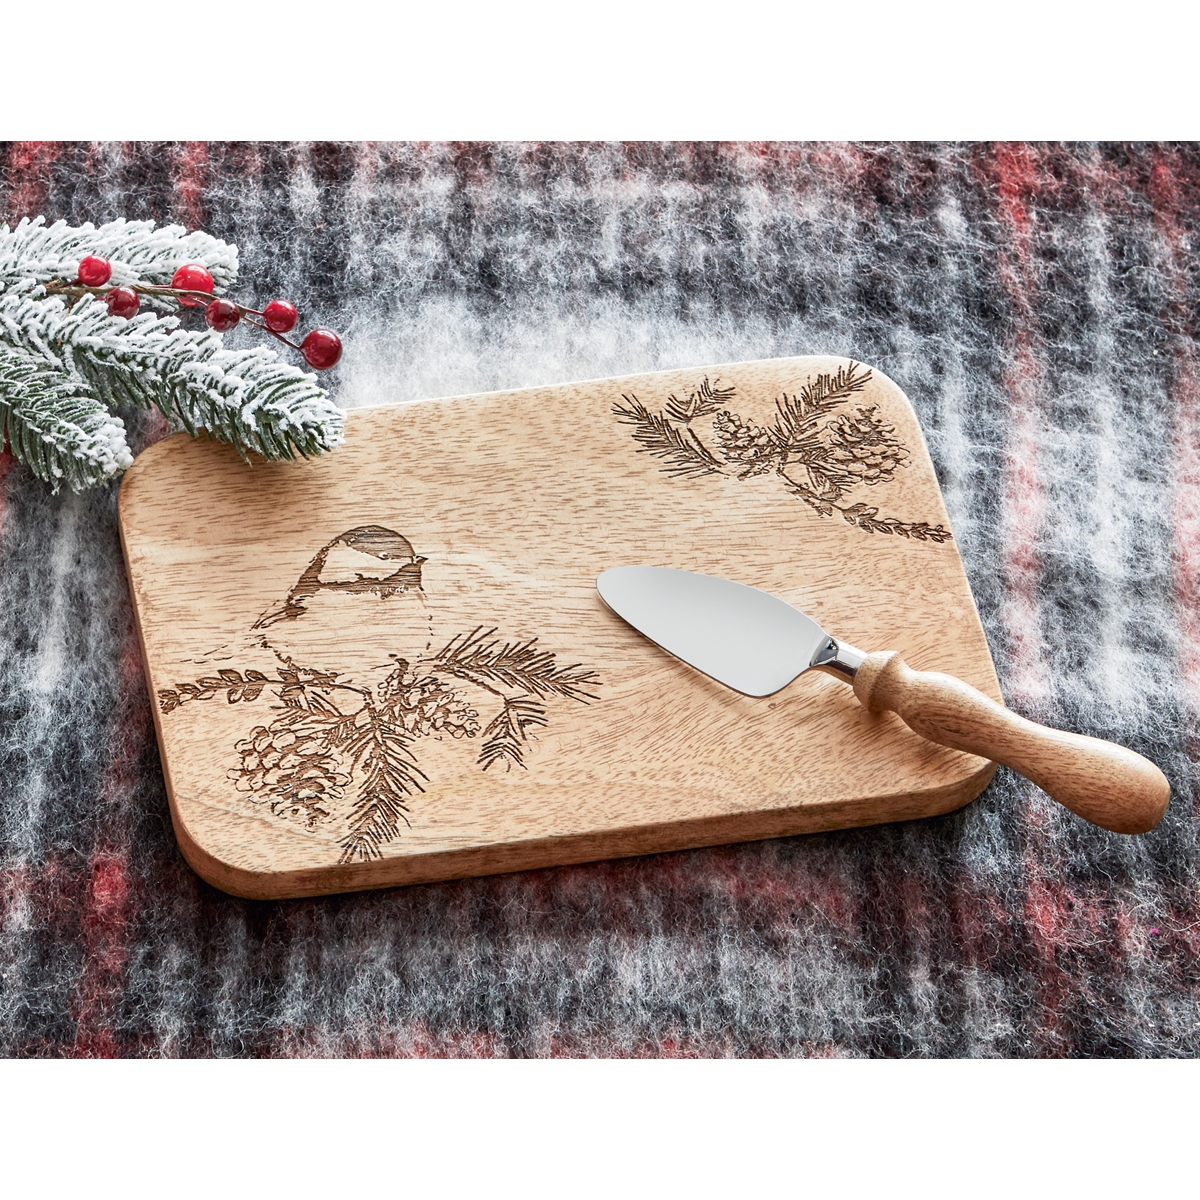 Chickadee Cutting Board and Spreading Knife Set